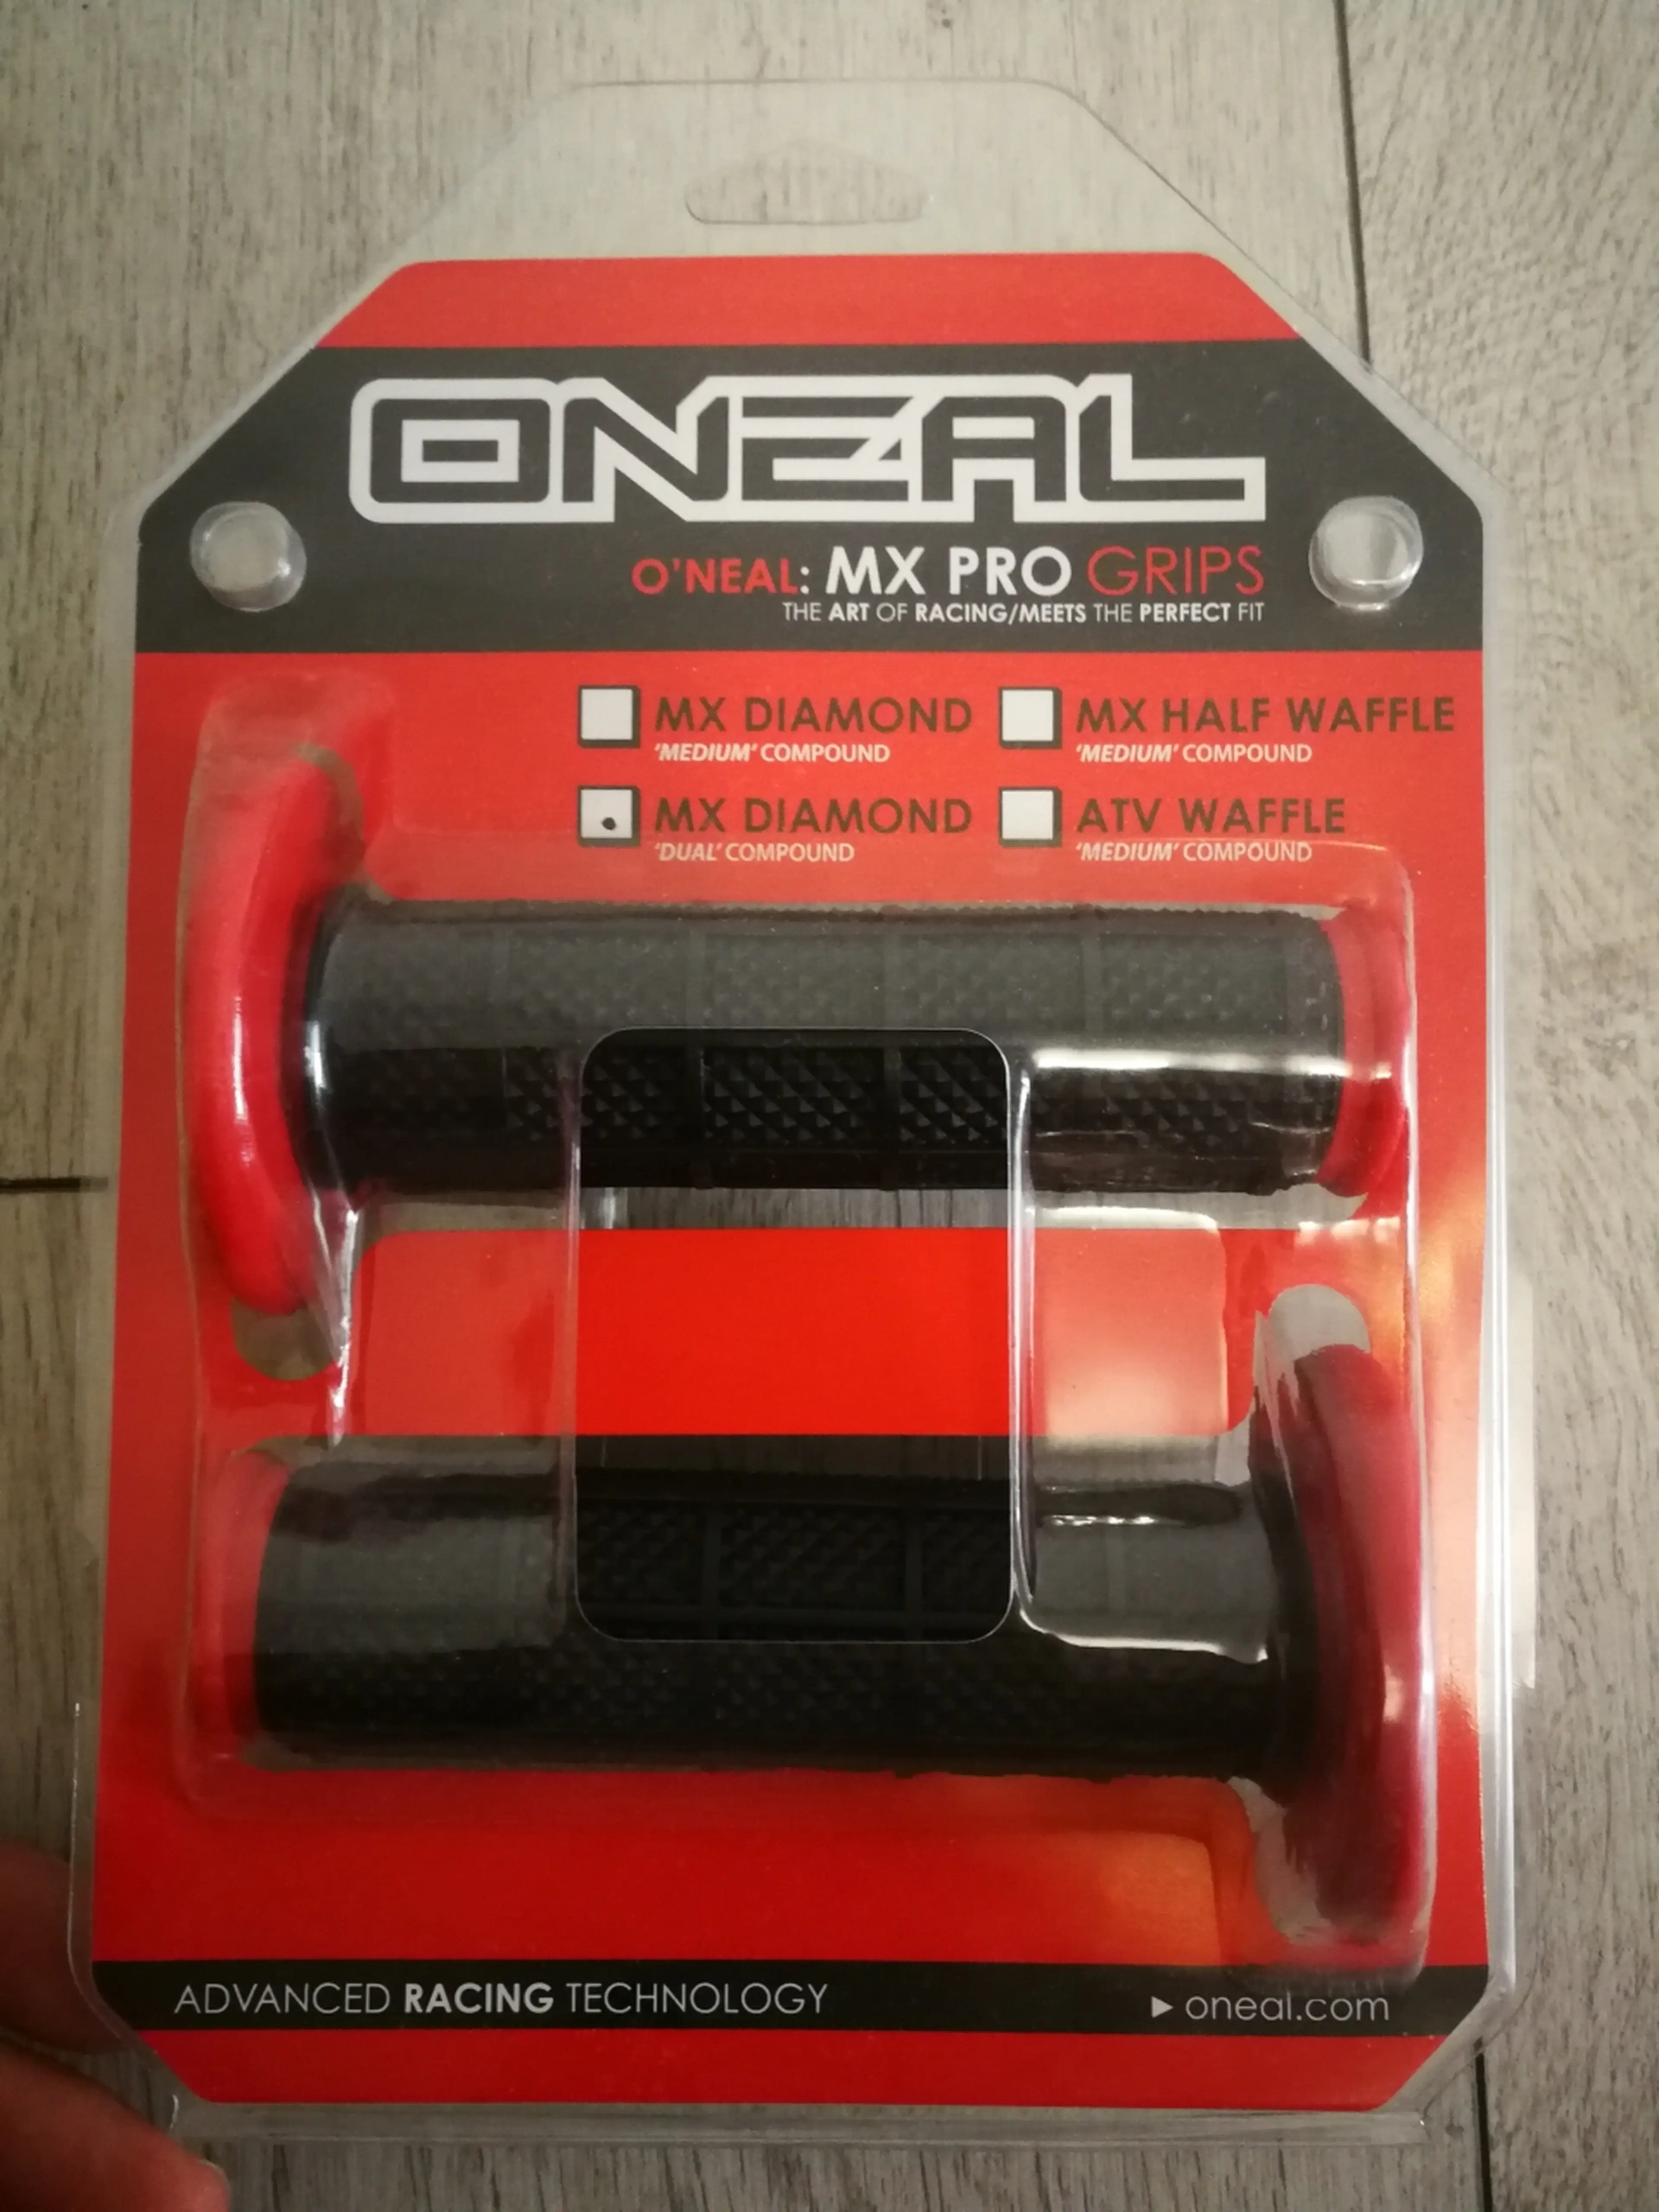 2. Oneal MX PRO